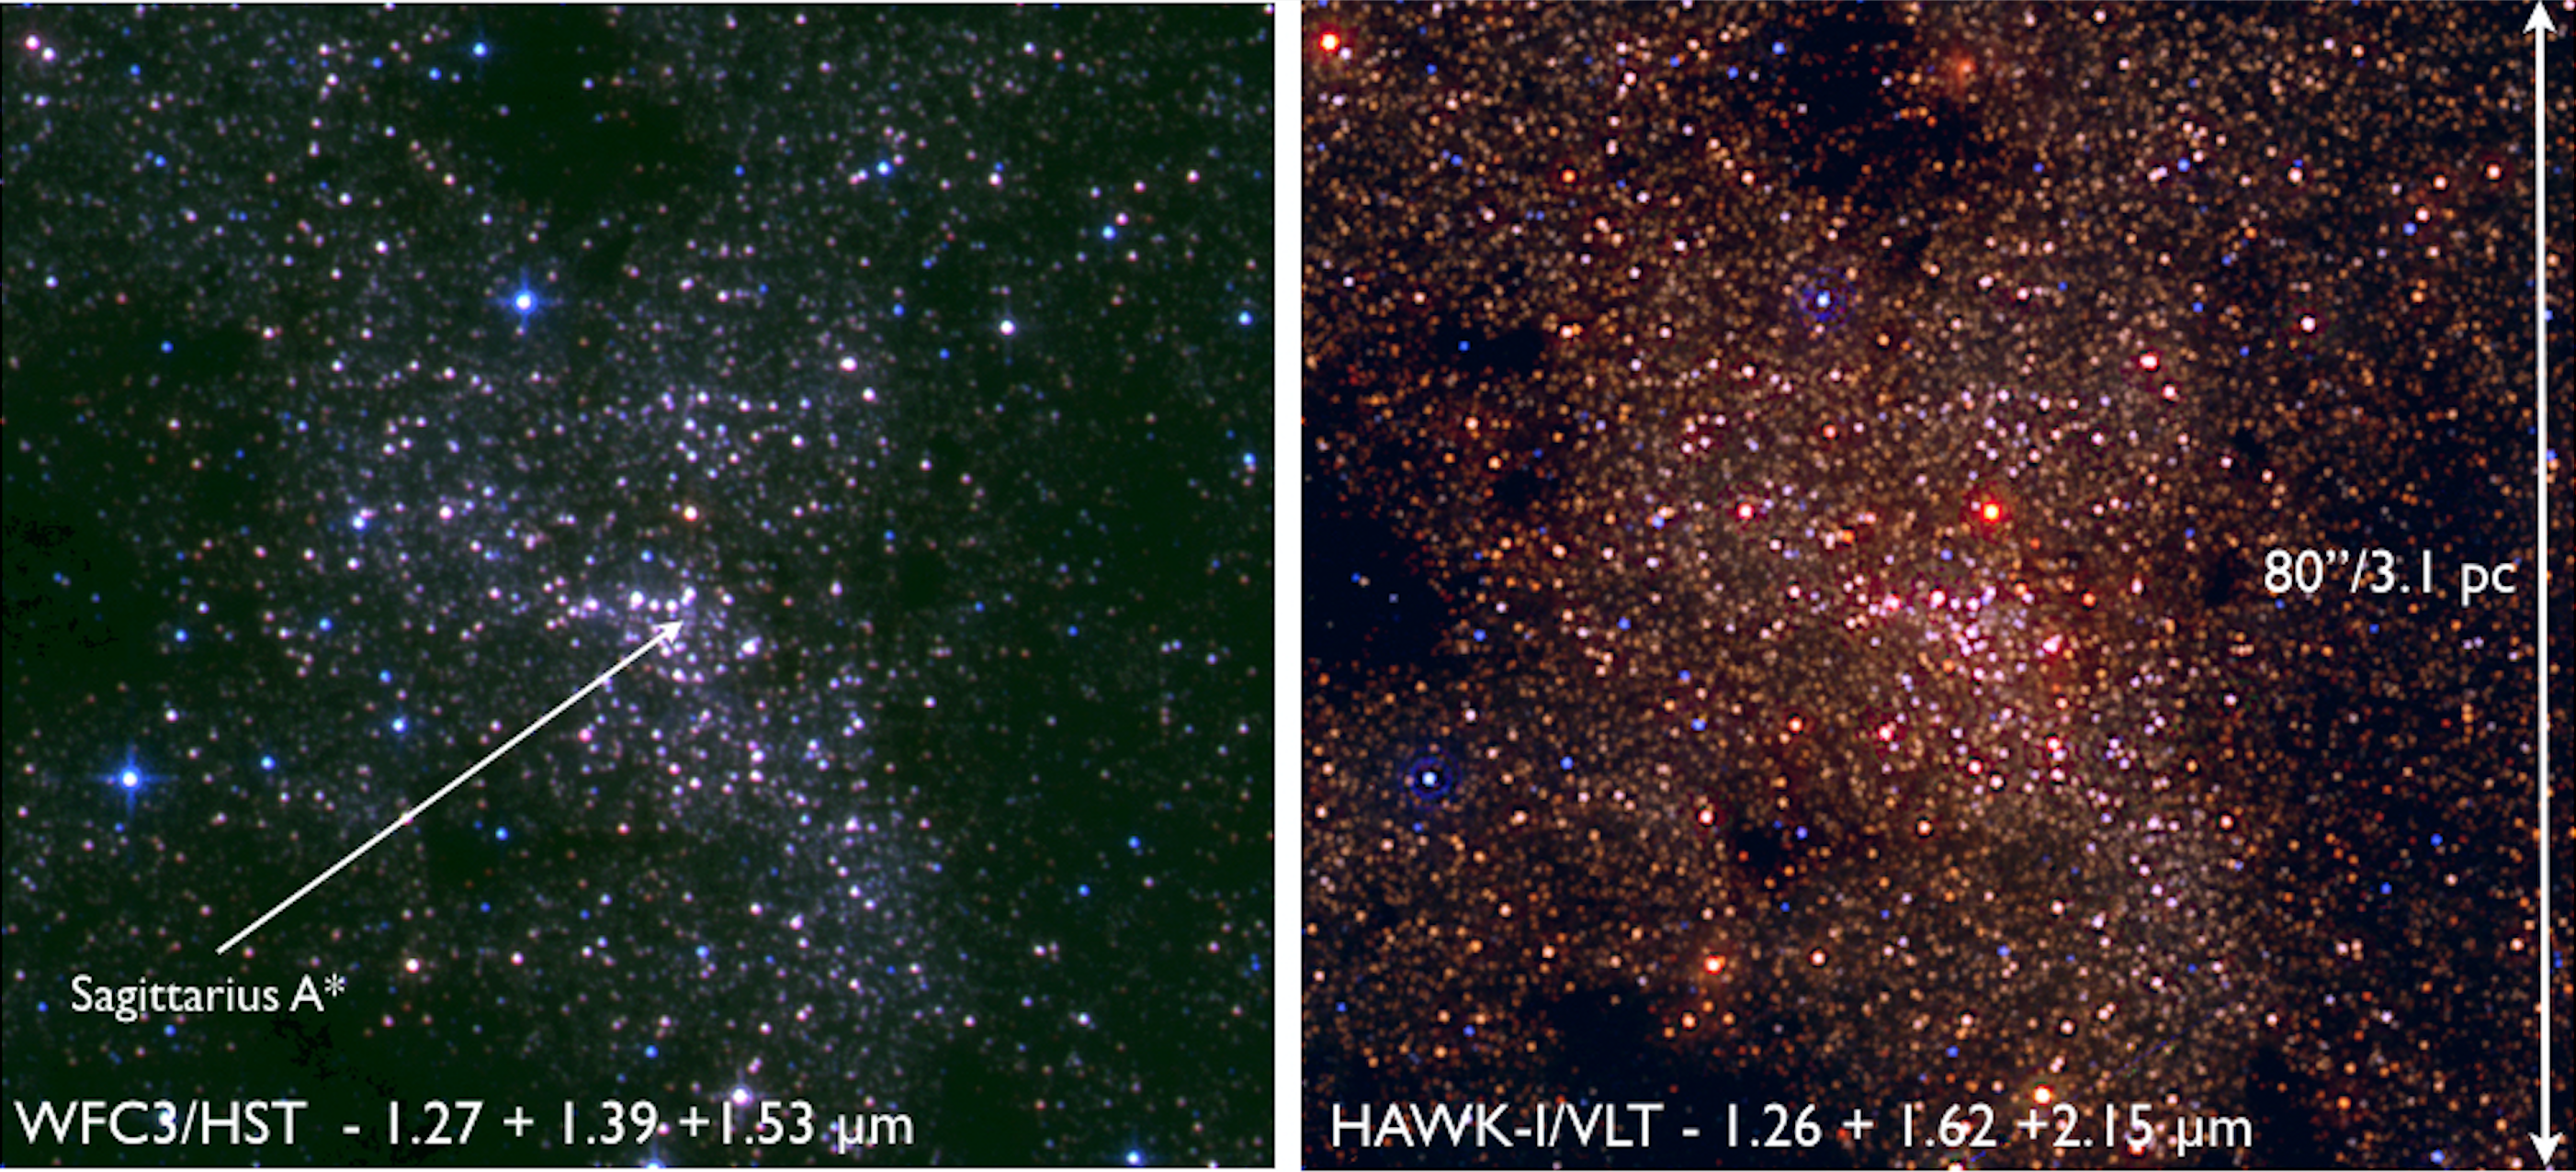 Comparison between images of the same GC region from WFC3/HST and HAWK-I/VLT speckle holography.